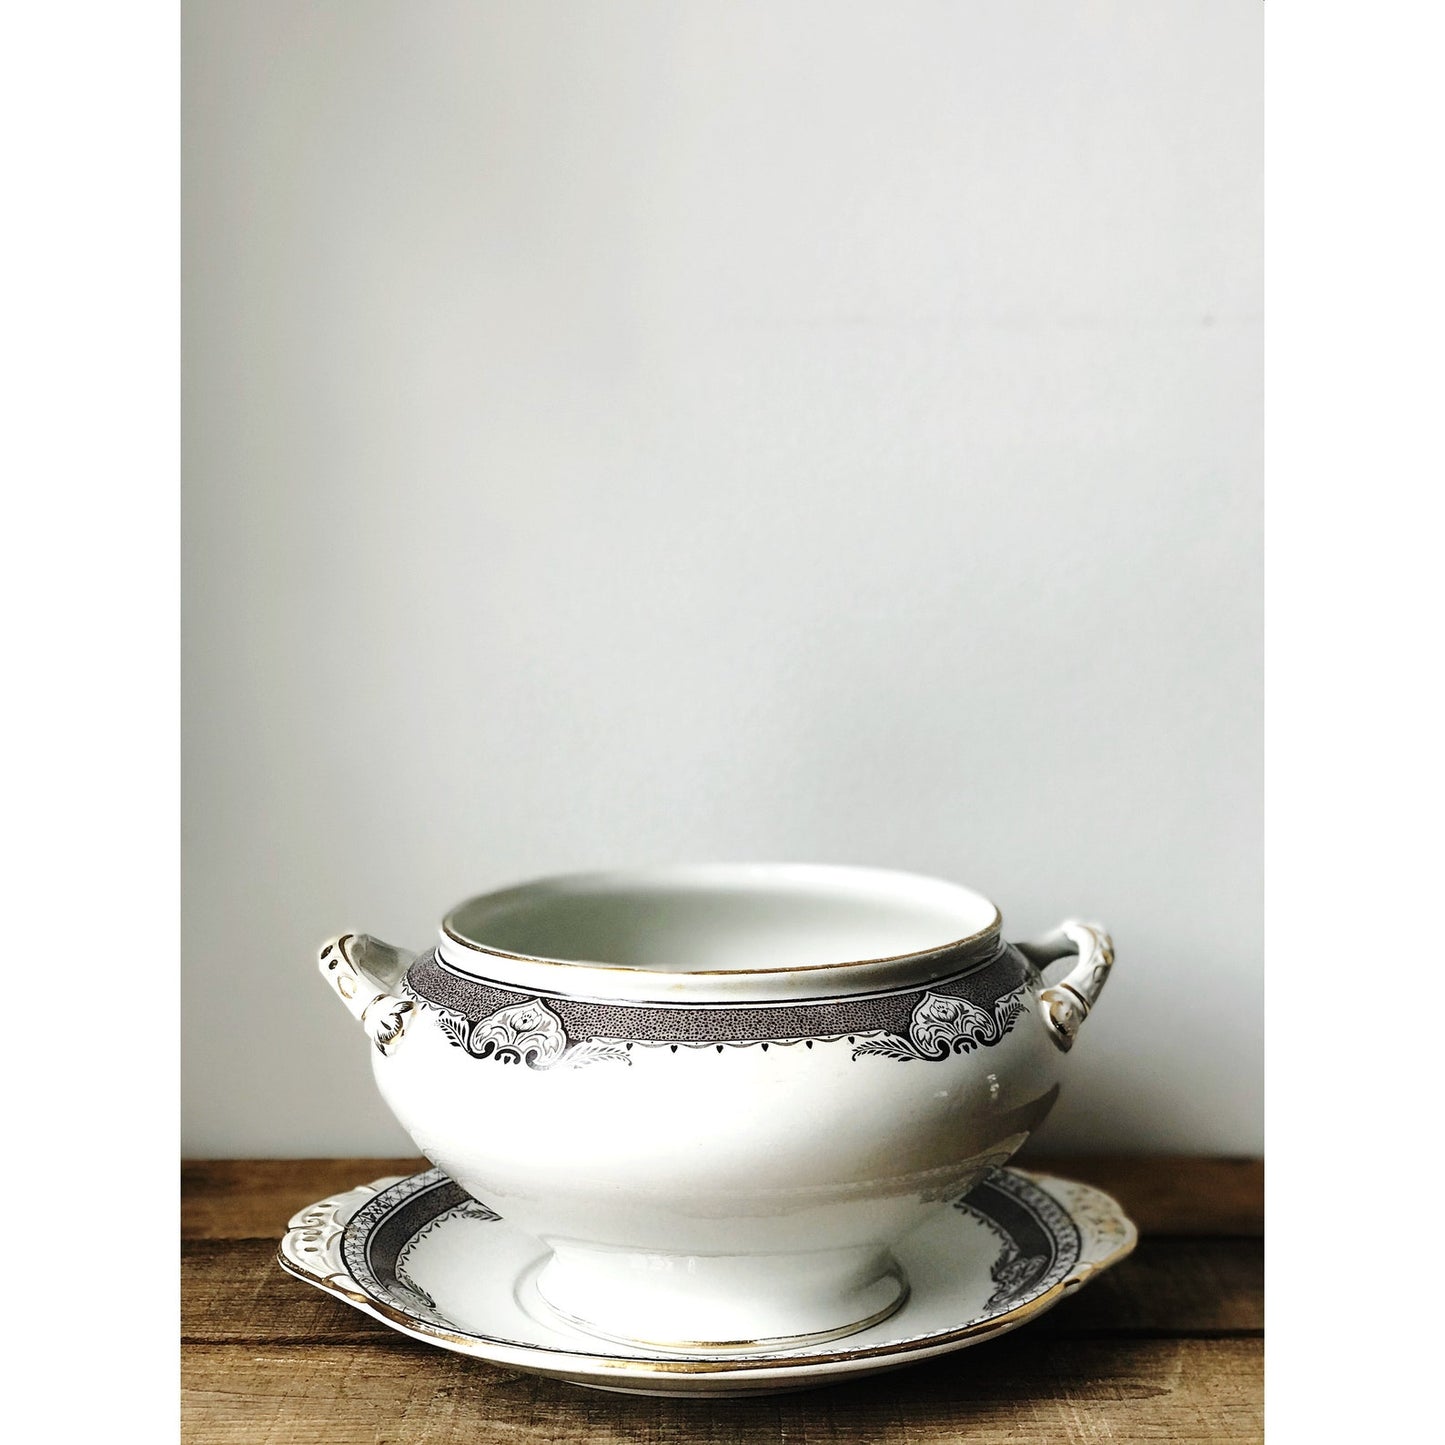 Burleighware Kenilworth Soup Tureen with Under Plate